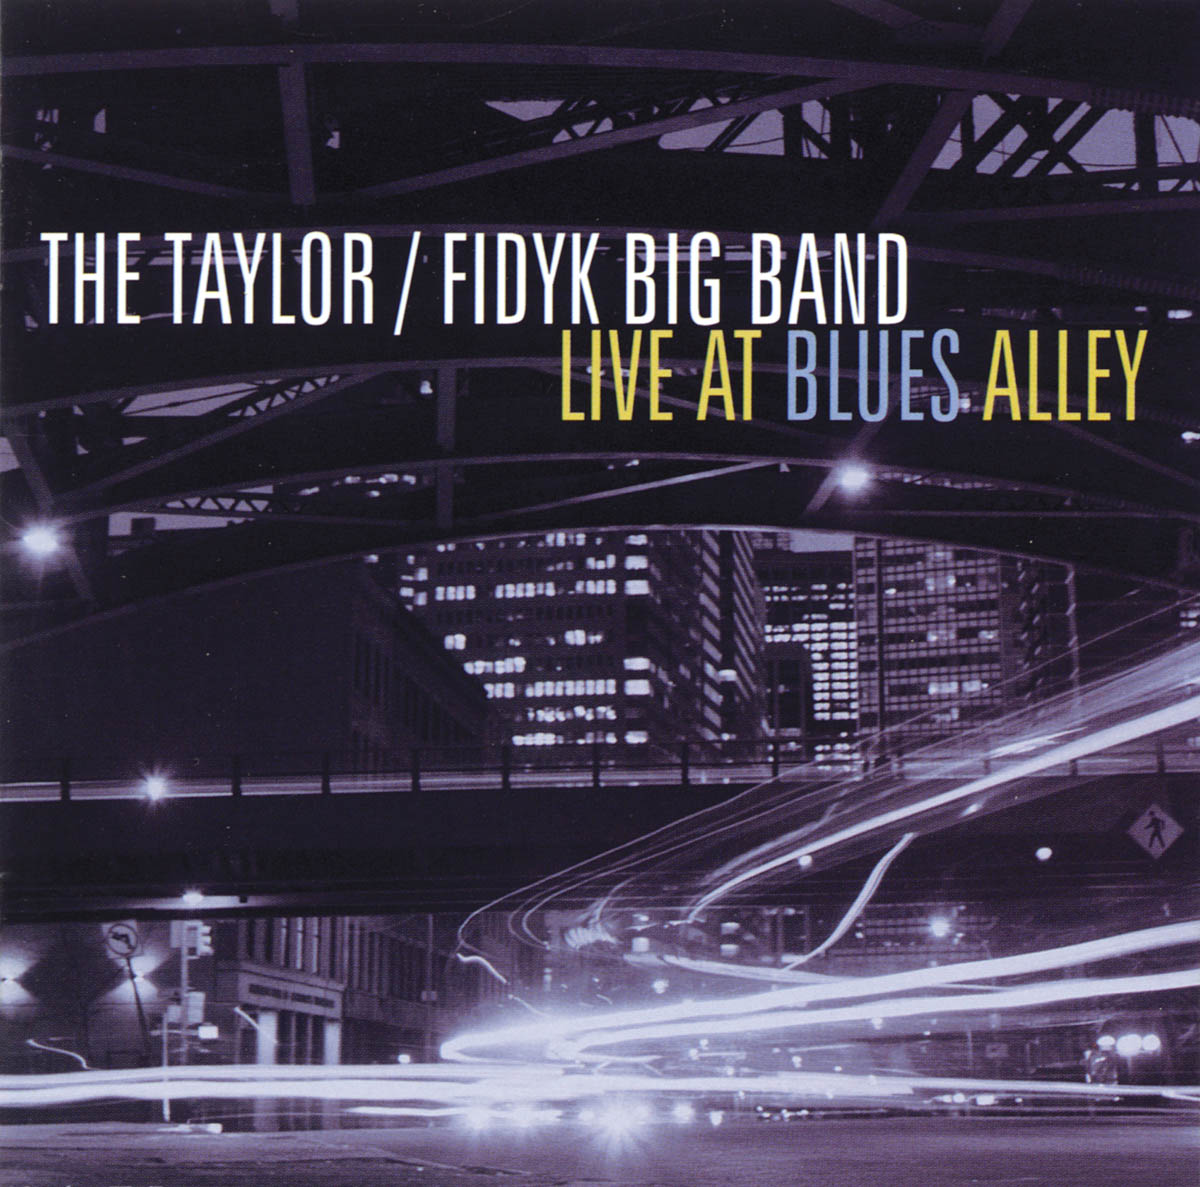 Fidyk Big Band: Live at Blues Alley - The Taylor/Fidyk Big Band: Jazz Ensemble: